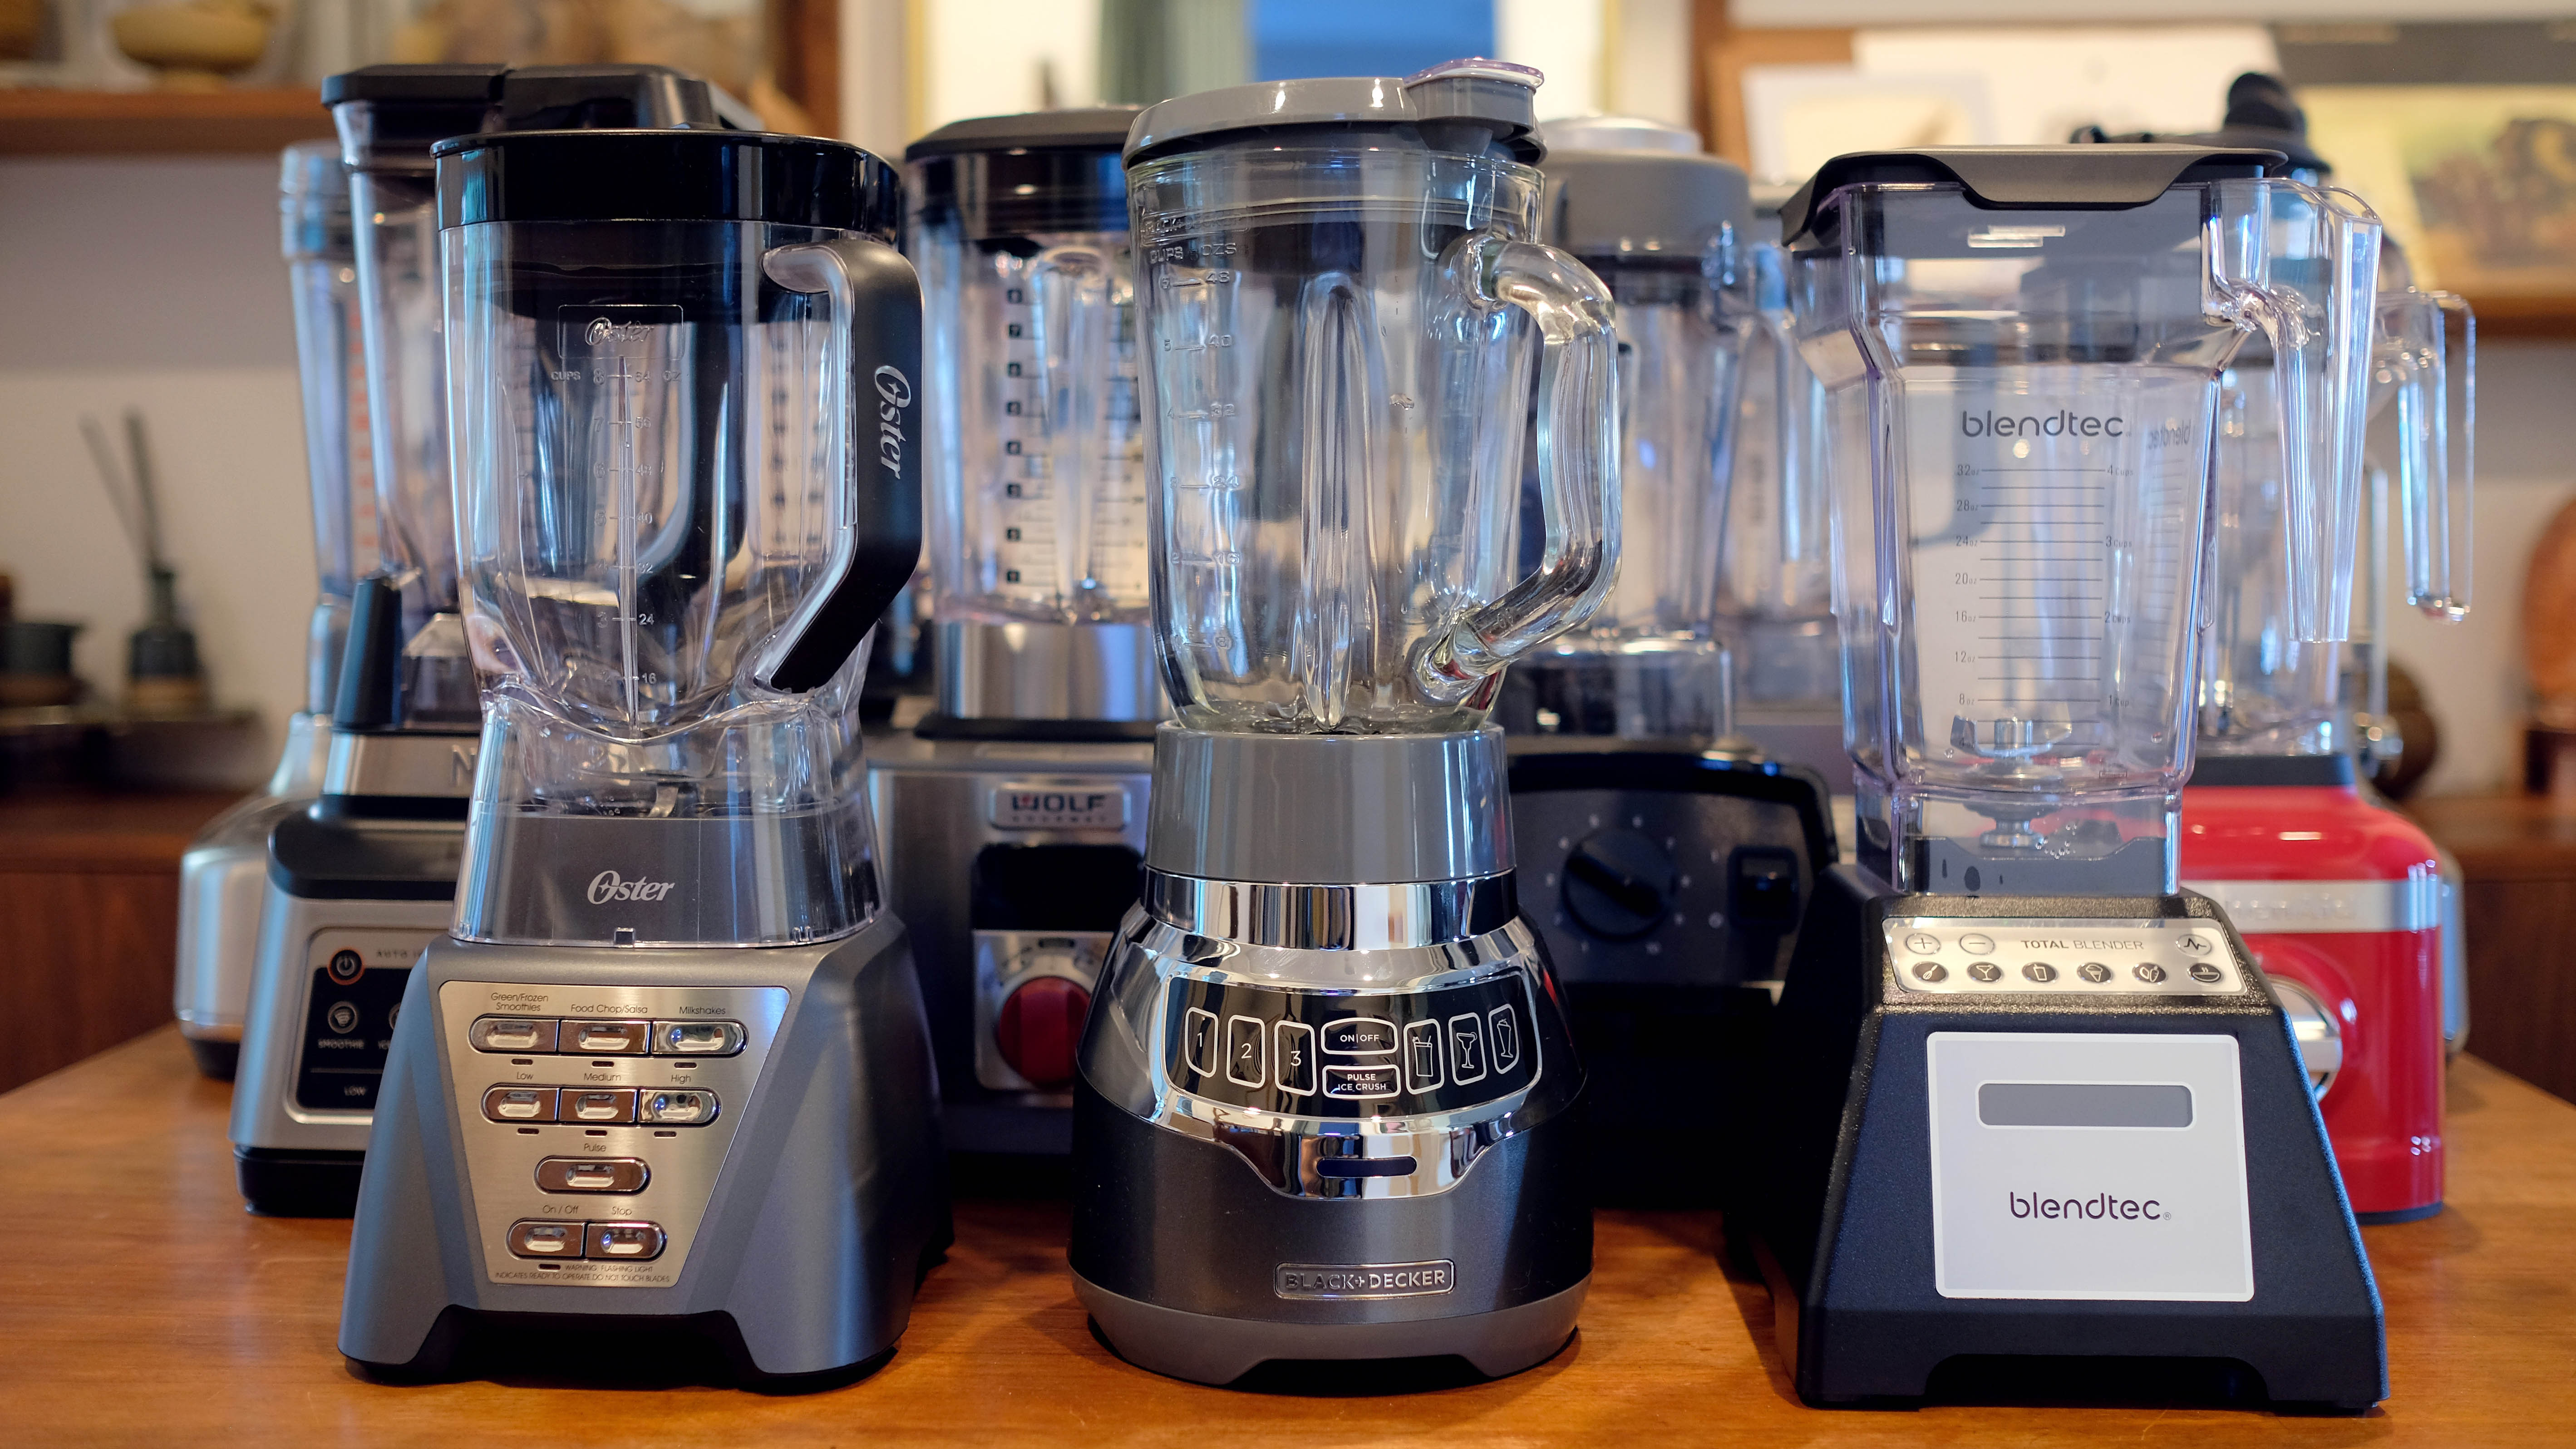 Best blenders in 2024: Tested and rated